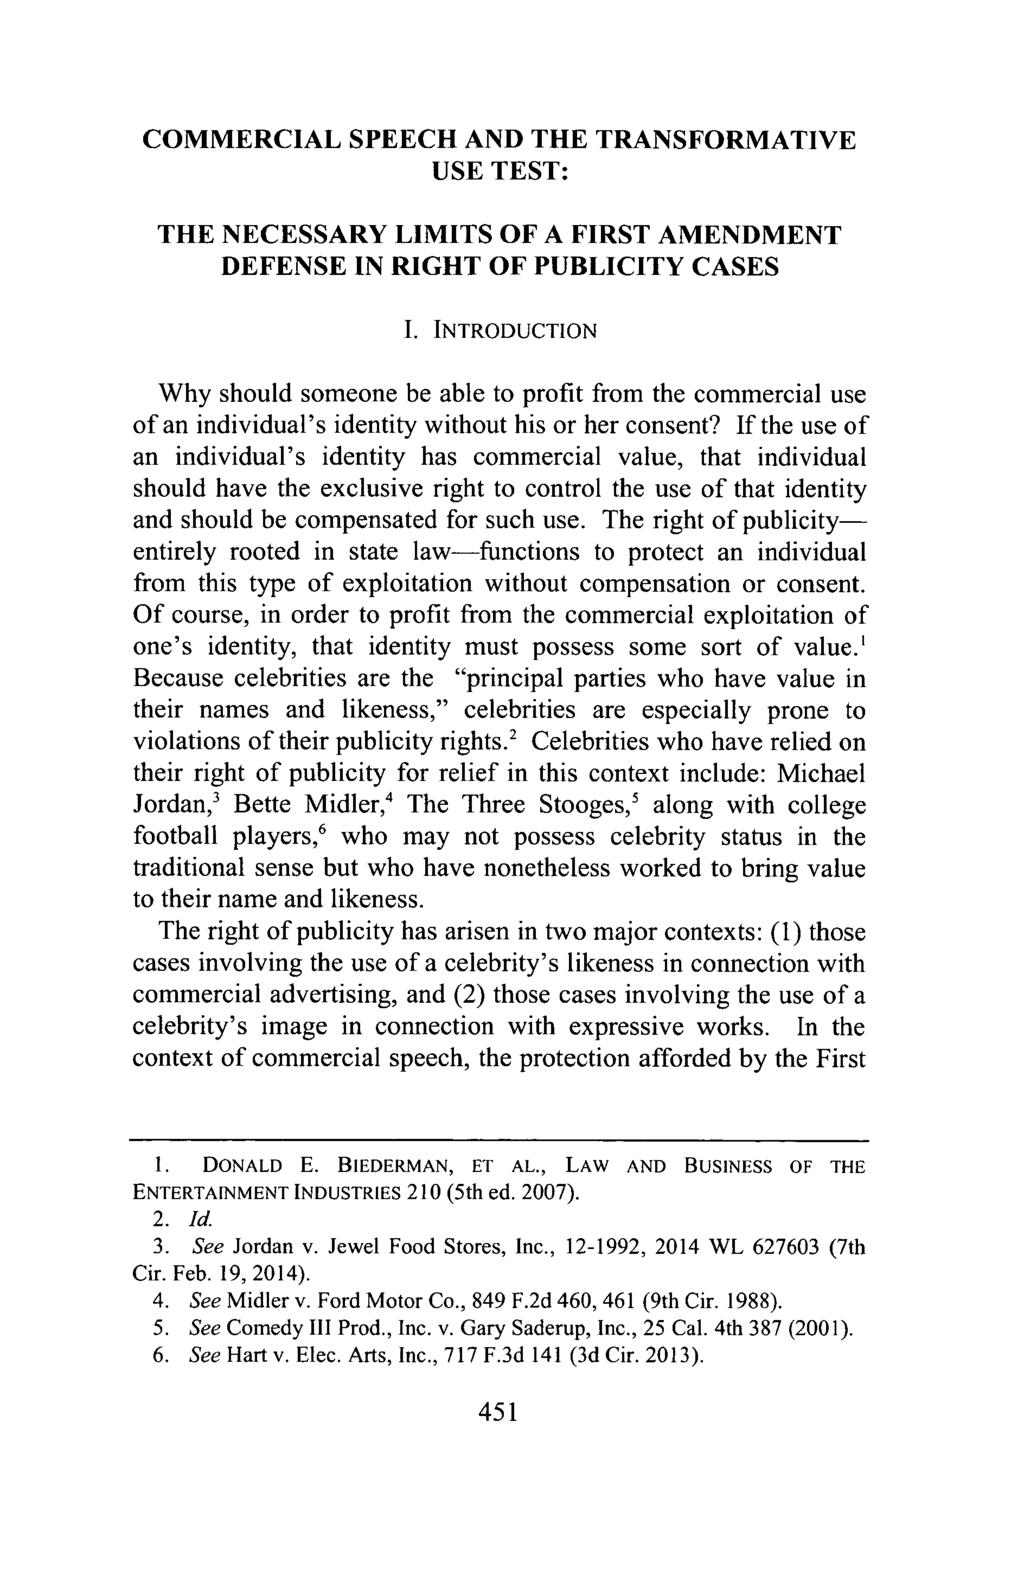 Smedley: Commercial Speech and the Transformative Use Test: The Necessary COMMERCIAL SPEECH AND THE TRANSFORMATIVE USE TEST: THE NECESSARY LIMITS OF A FIRST AMENDMENT DEFENSE IN RIGHT OF PUBLICITY